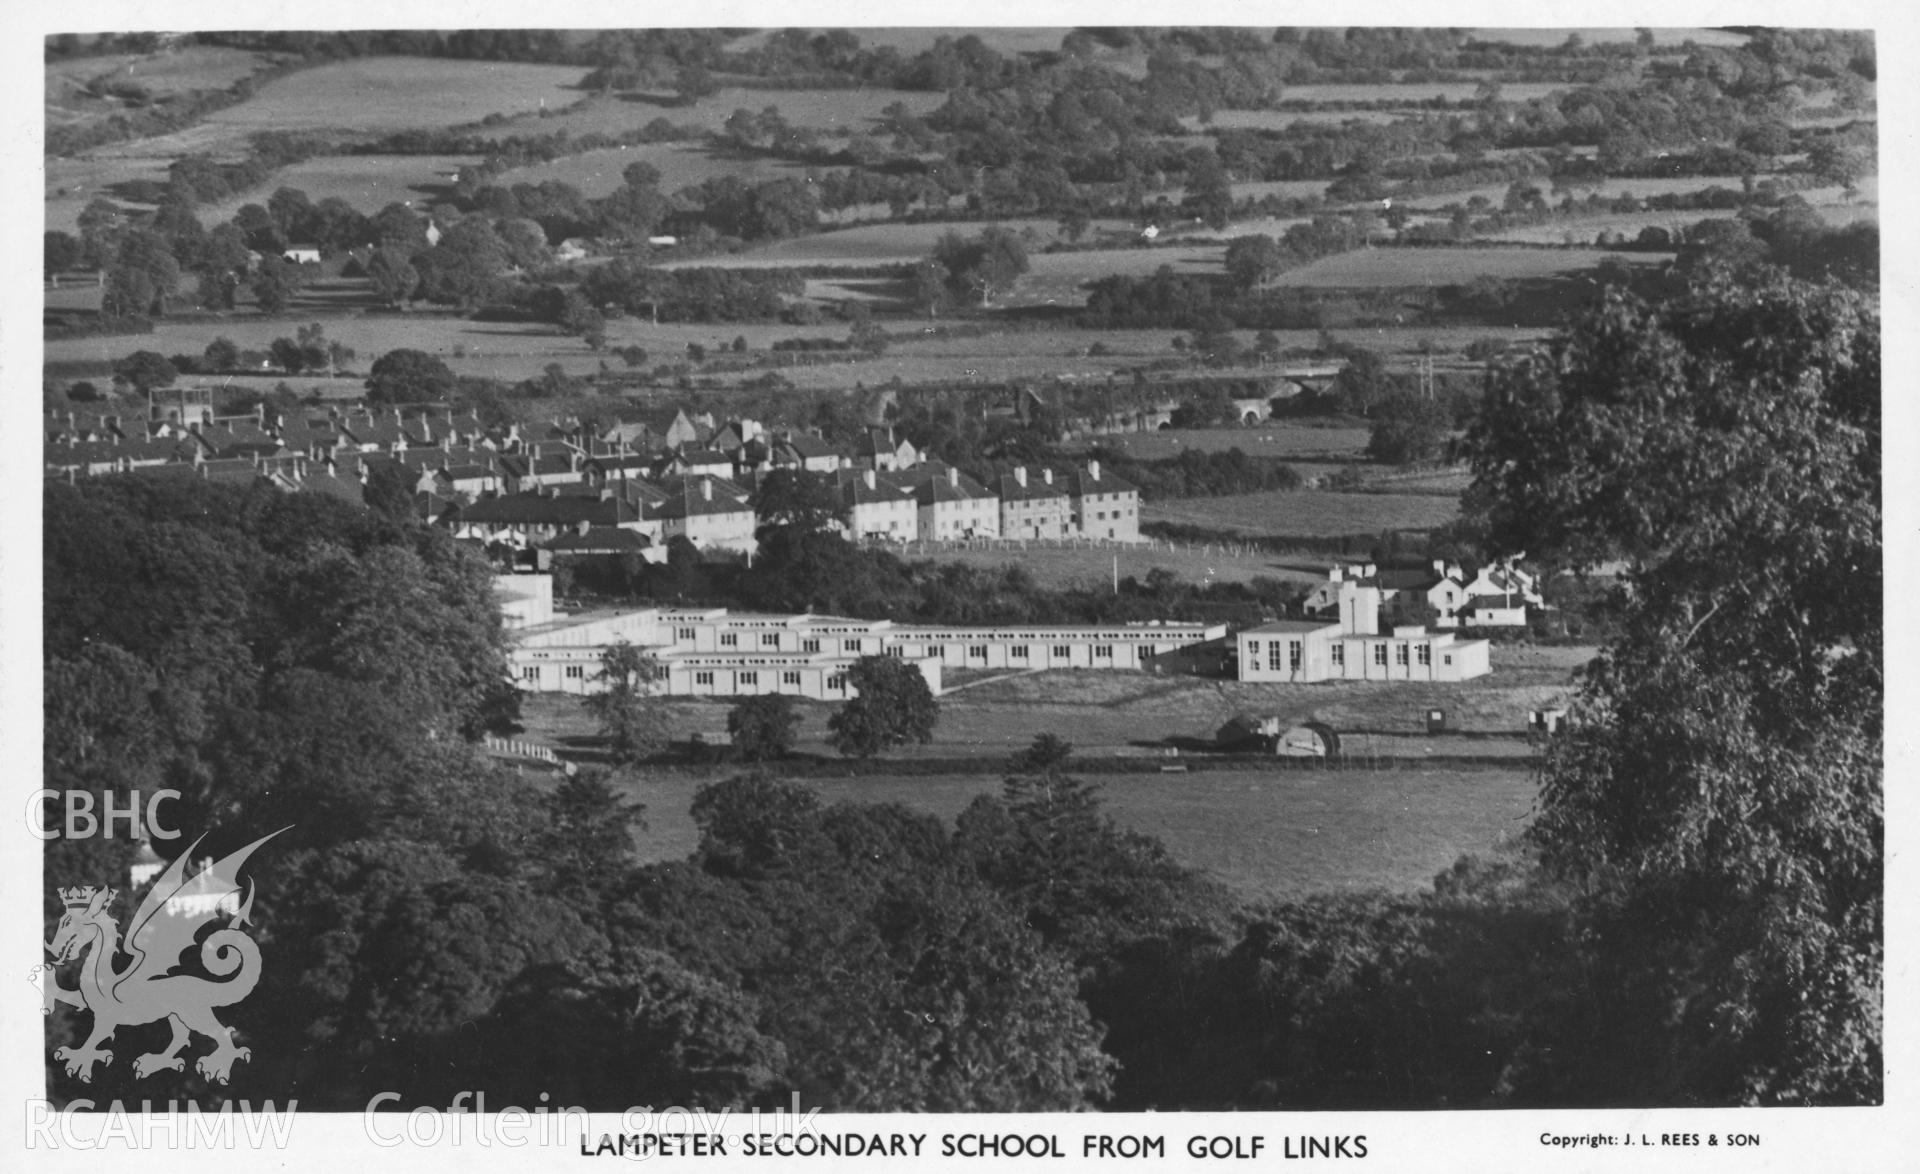 Digital copy of postcard showing Lampeter Secondary School from golf links, dated c. 1949 (Publisher: J L Rees & Son).  Loaned for copying by Charlie Downes.